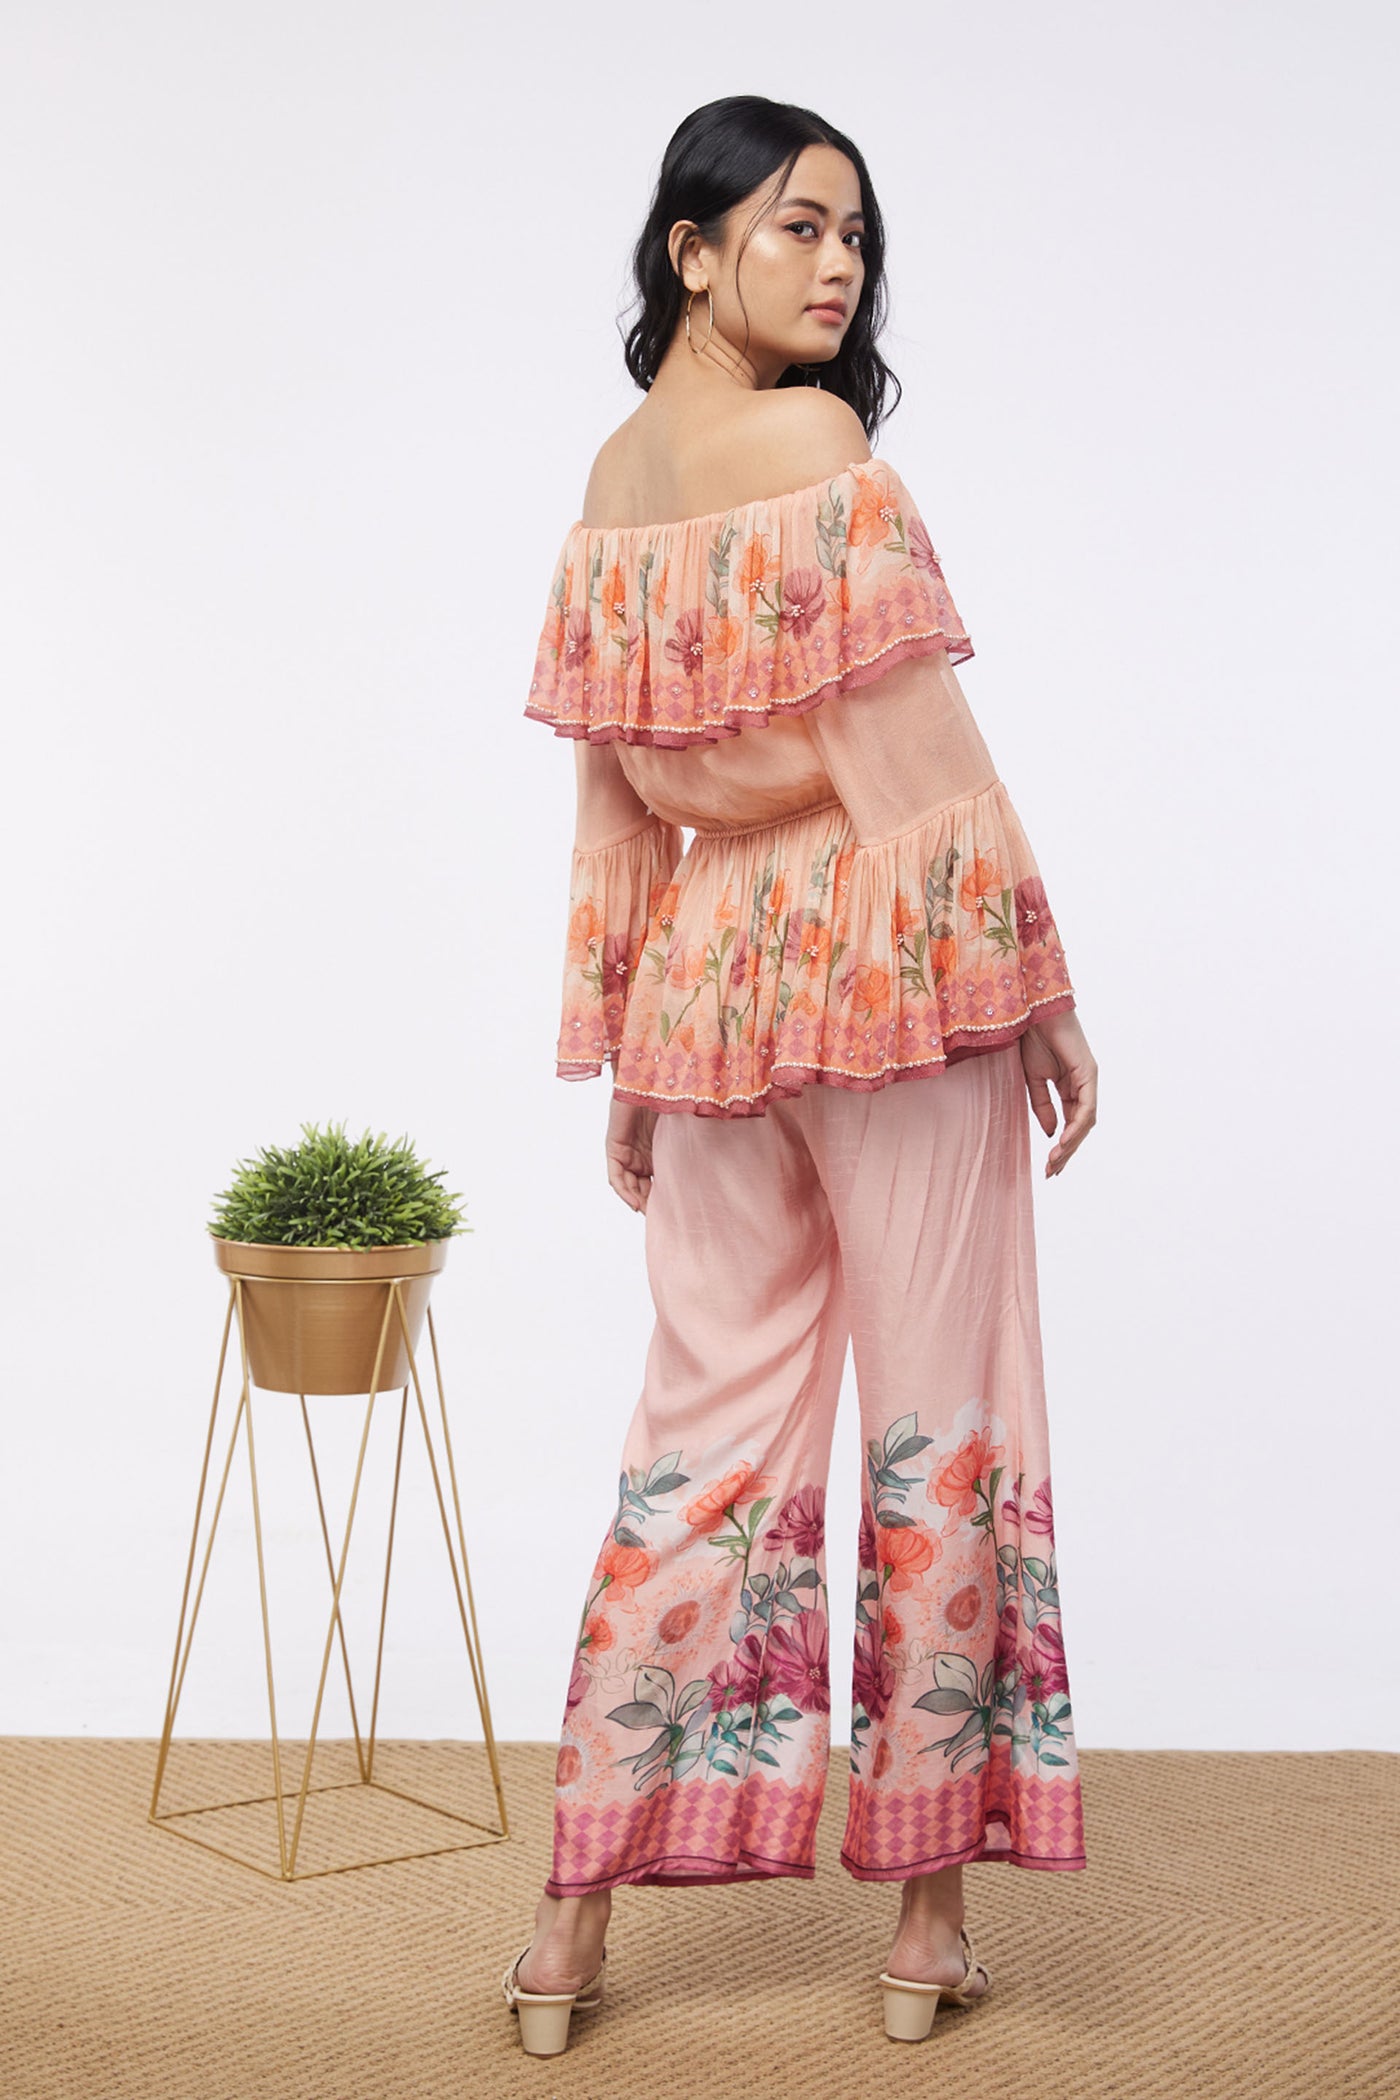 Sougat Paul Blooming Bud Printed Off-shoulder Embroidered Top With Flared Pants western indian designer womenswear fashion online shopping melange singapore